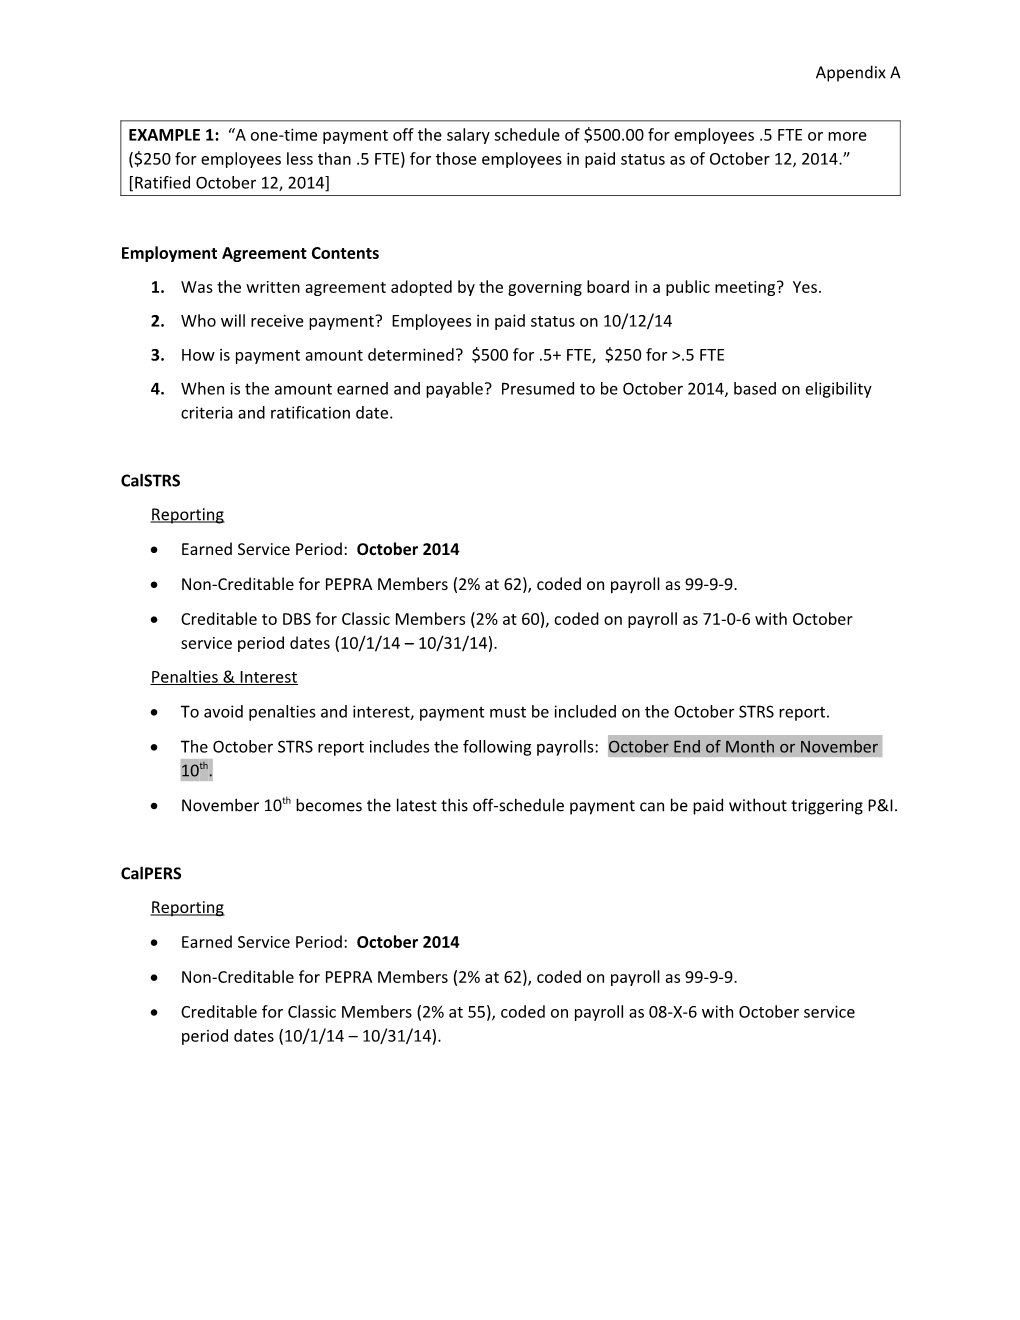 Employment Agreement Contents